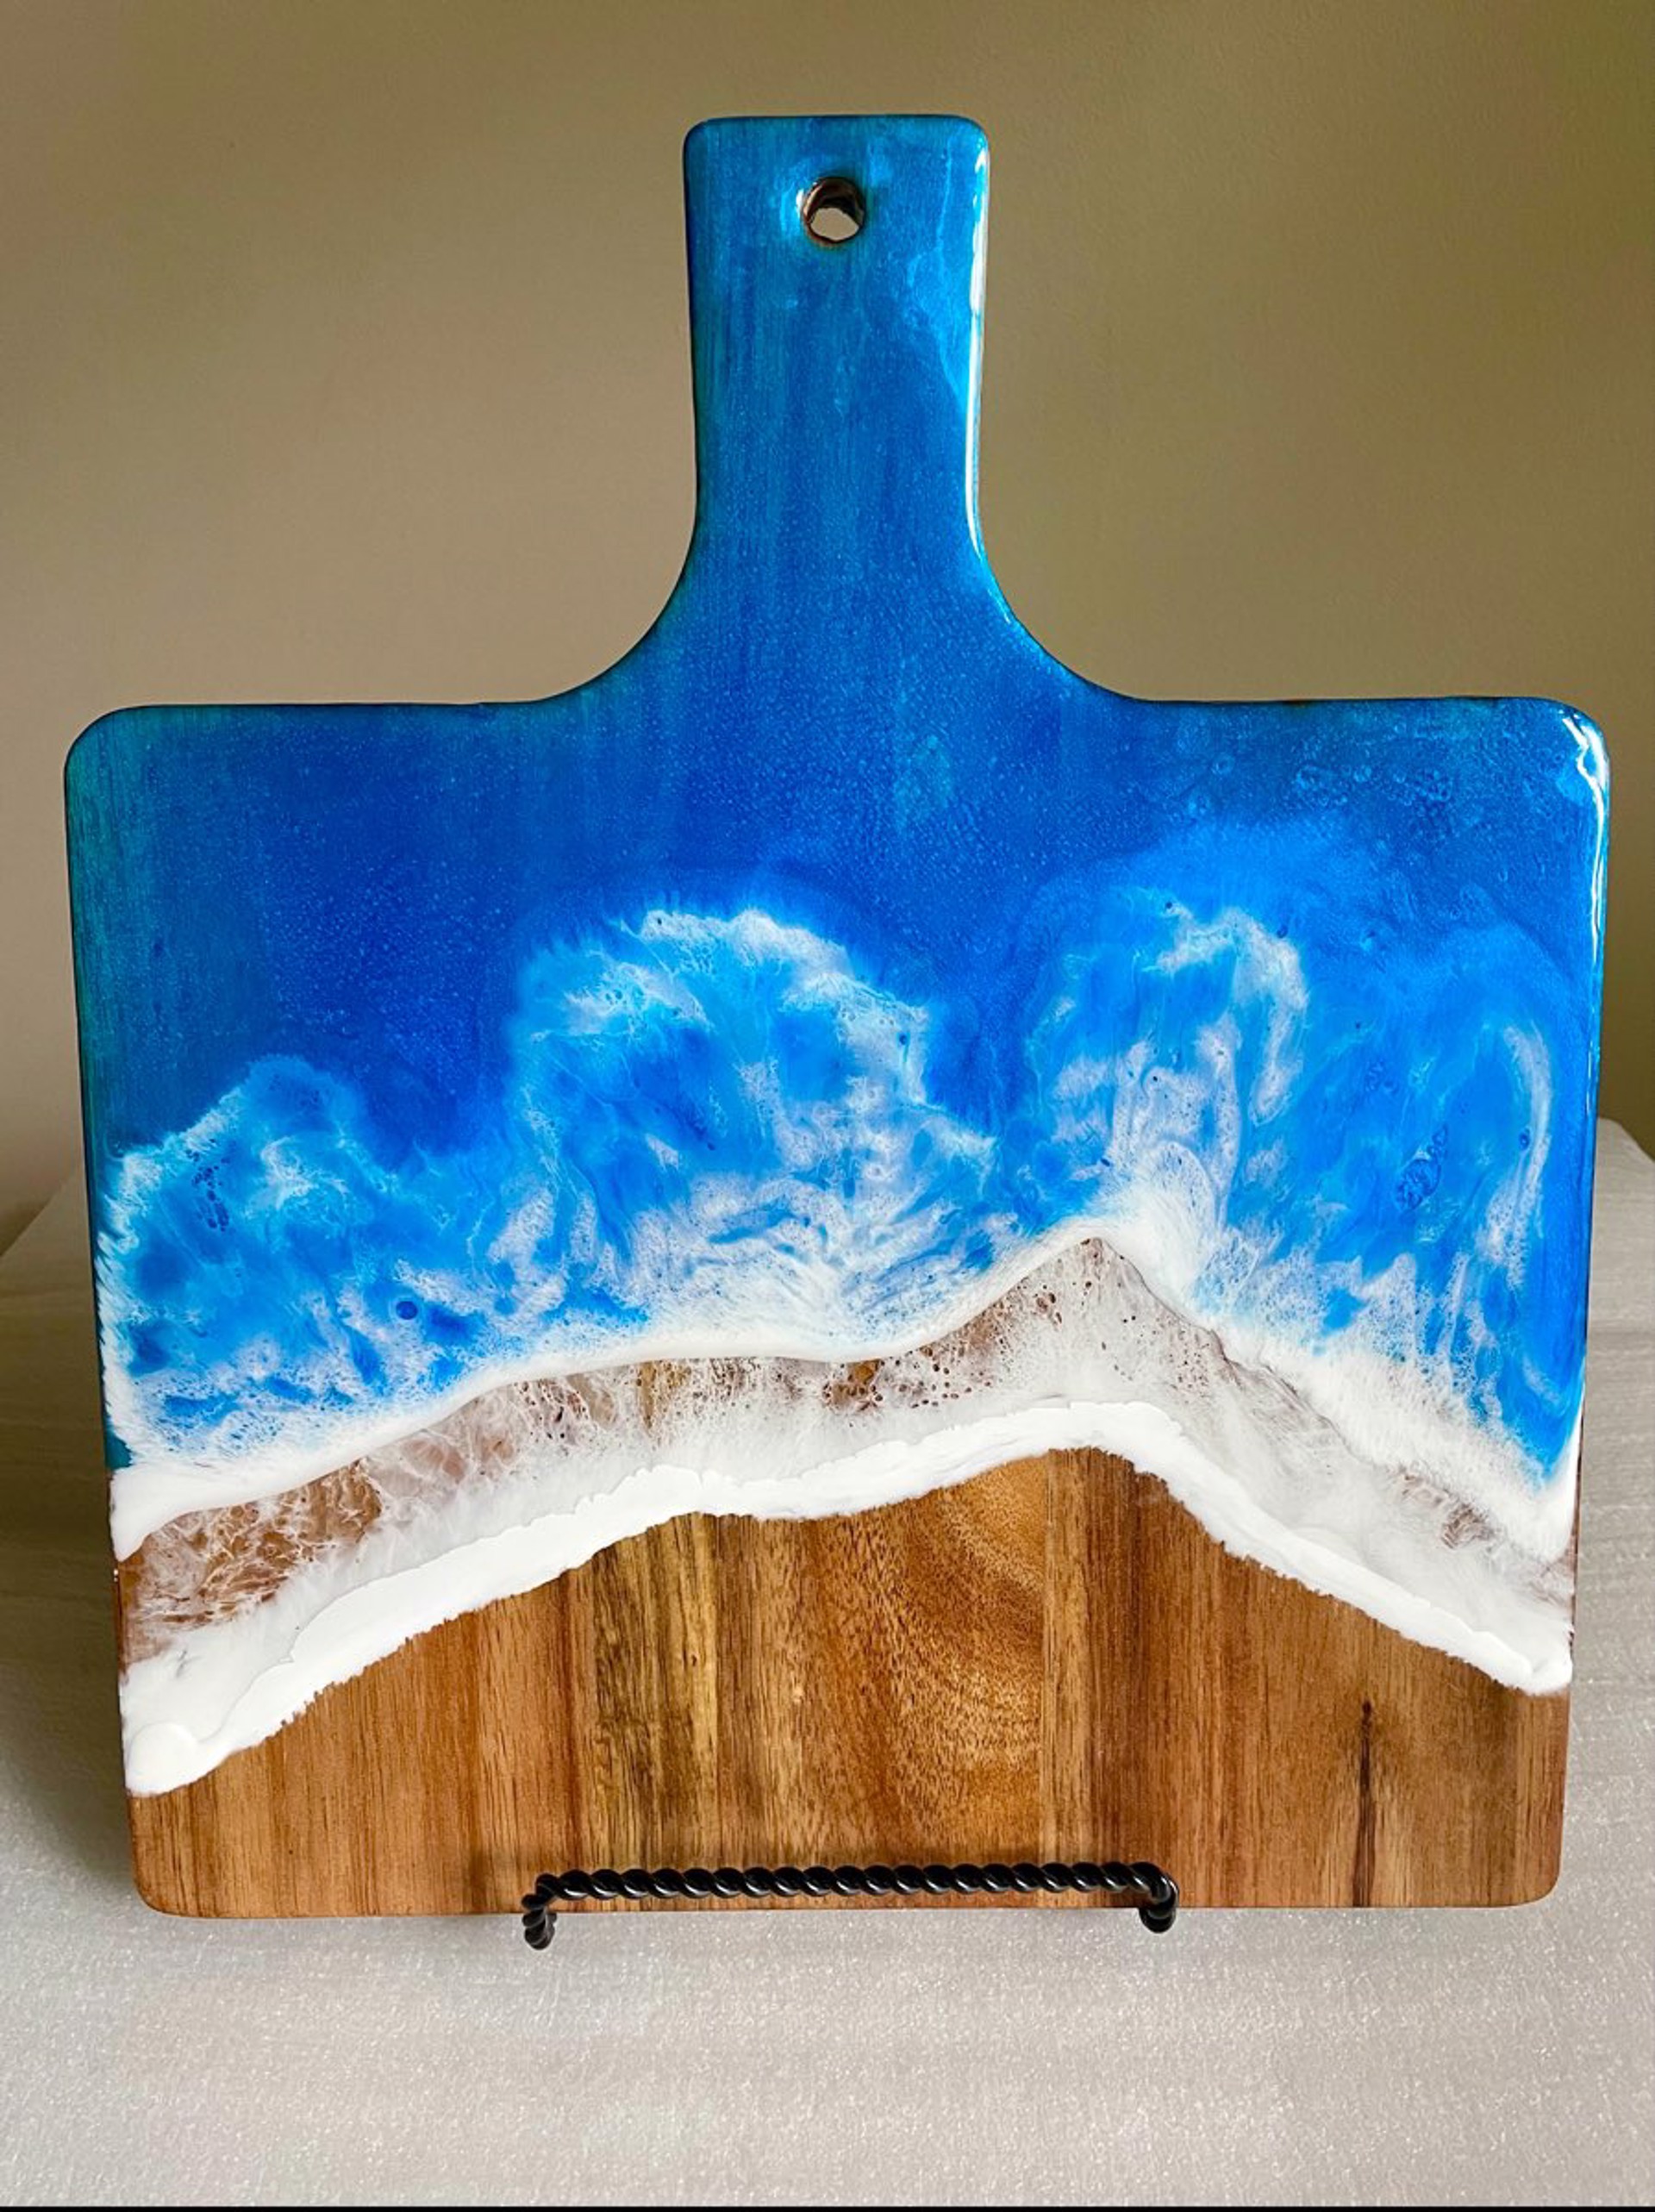 MDM22-27 Square Blue Resin and Wood Charcuterie Board by Mary Duke McCartt